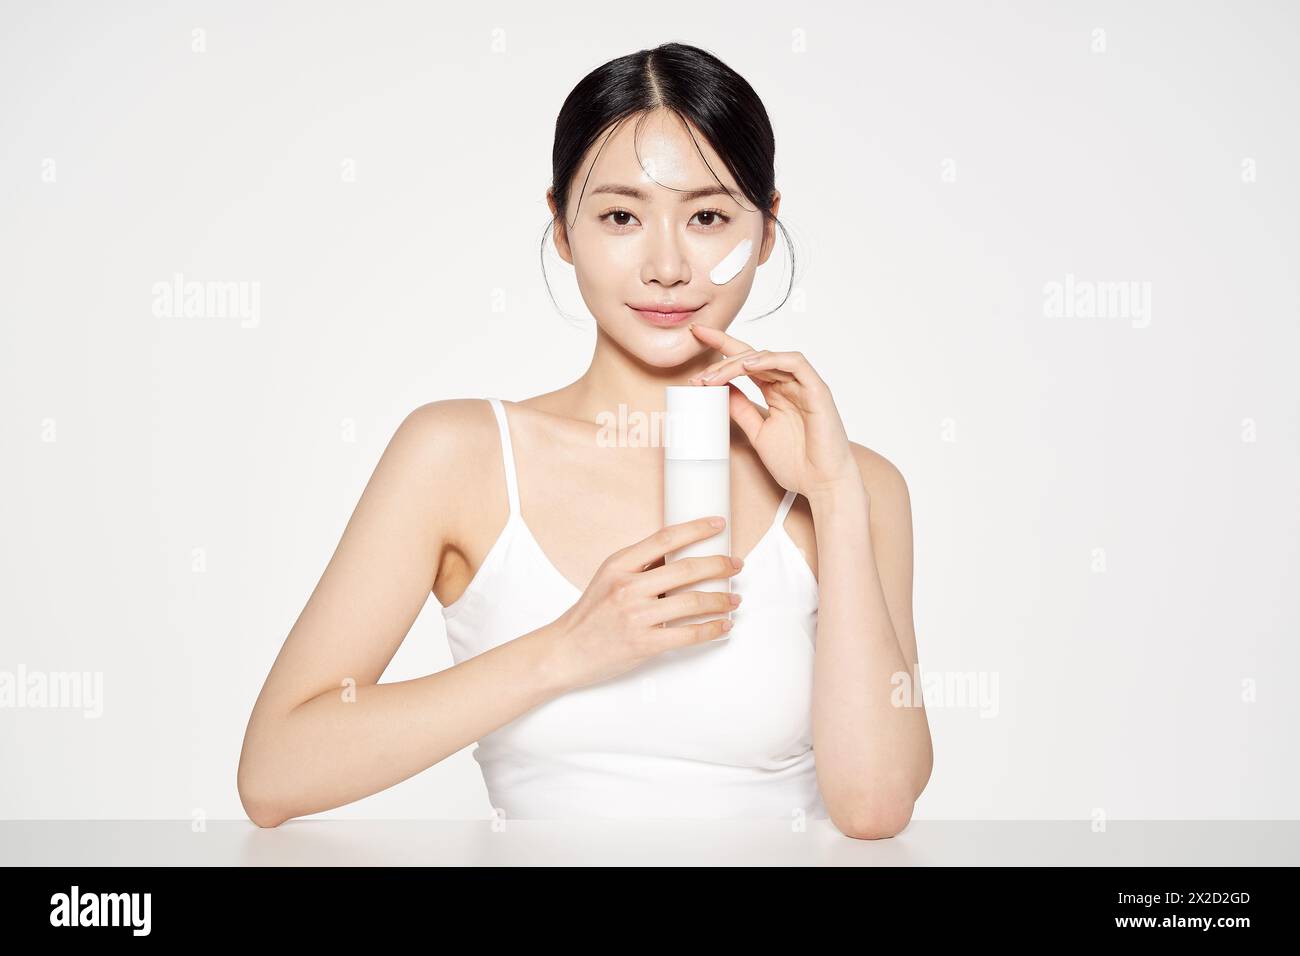 Asian Woman Poses With White Cosmetics Bottle Stock Photo